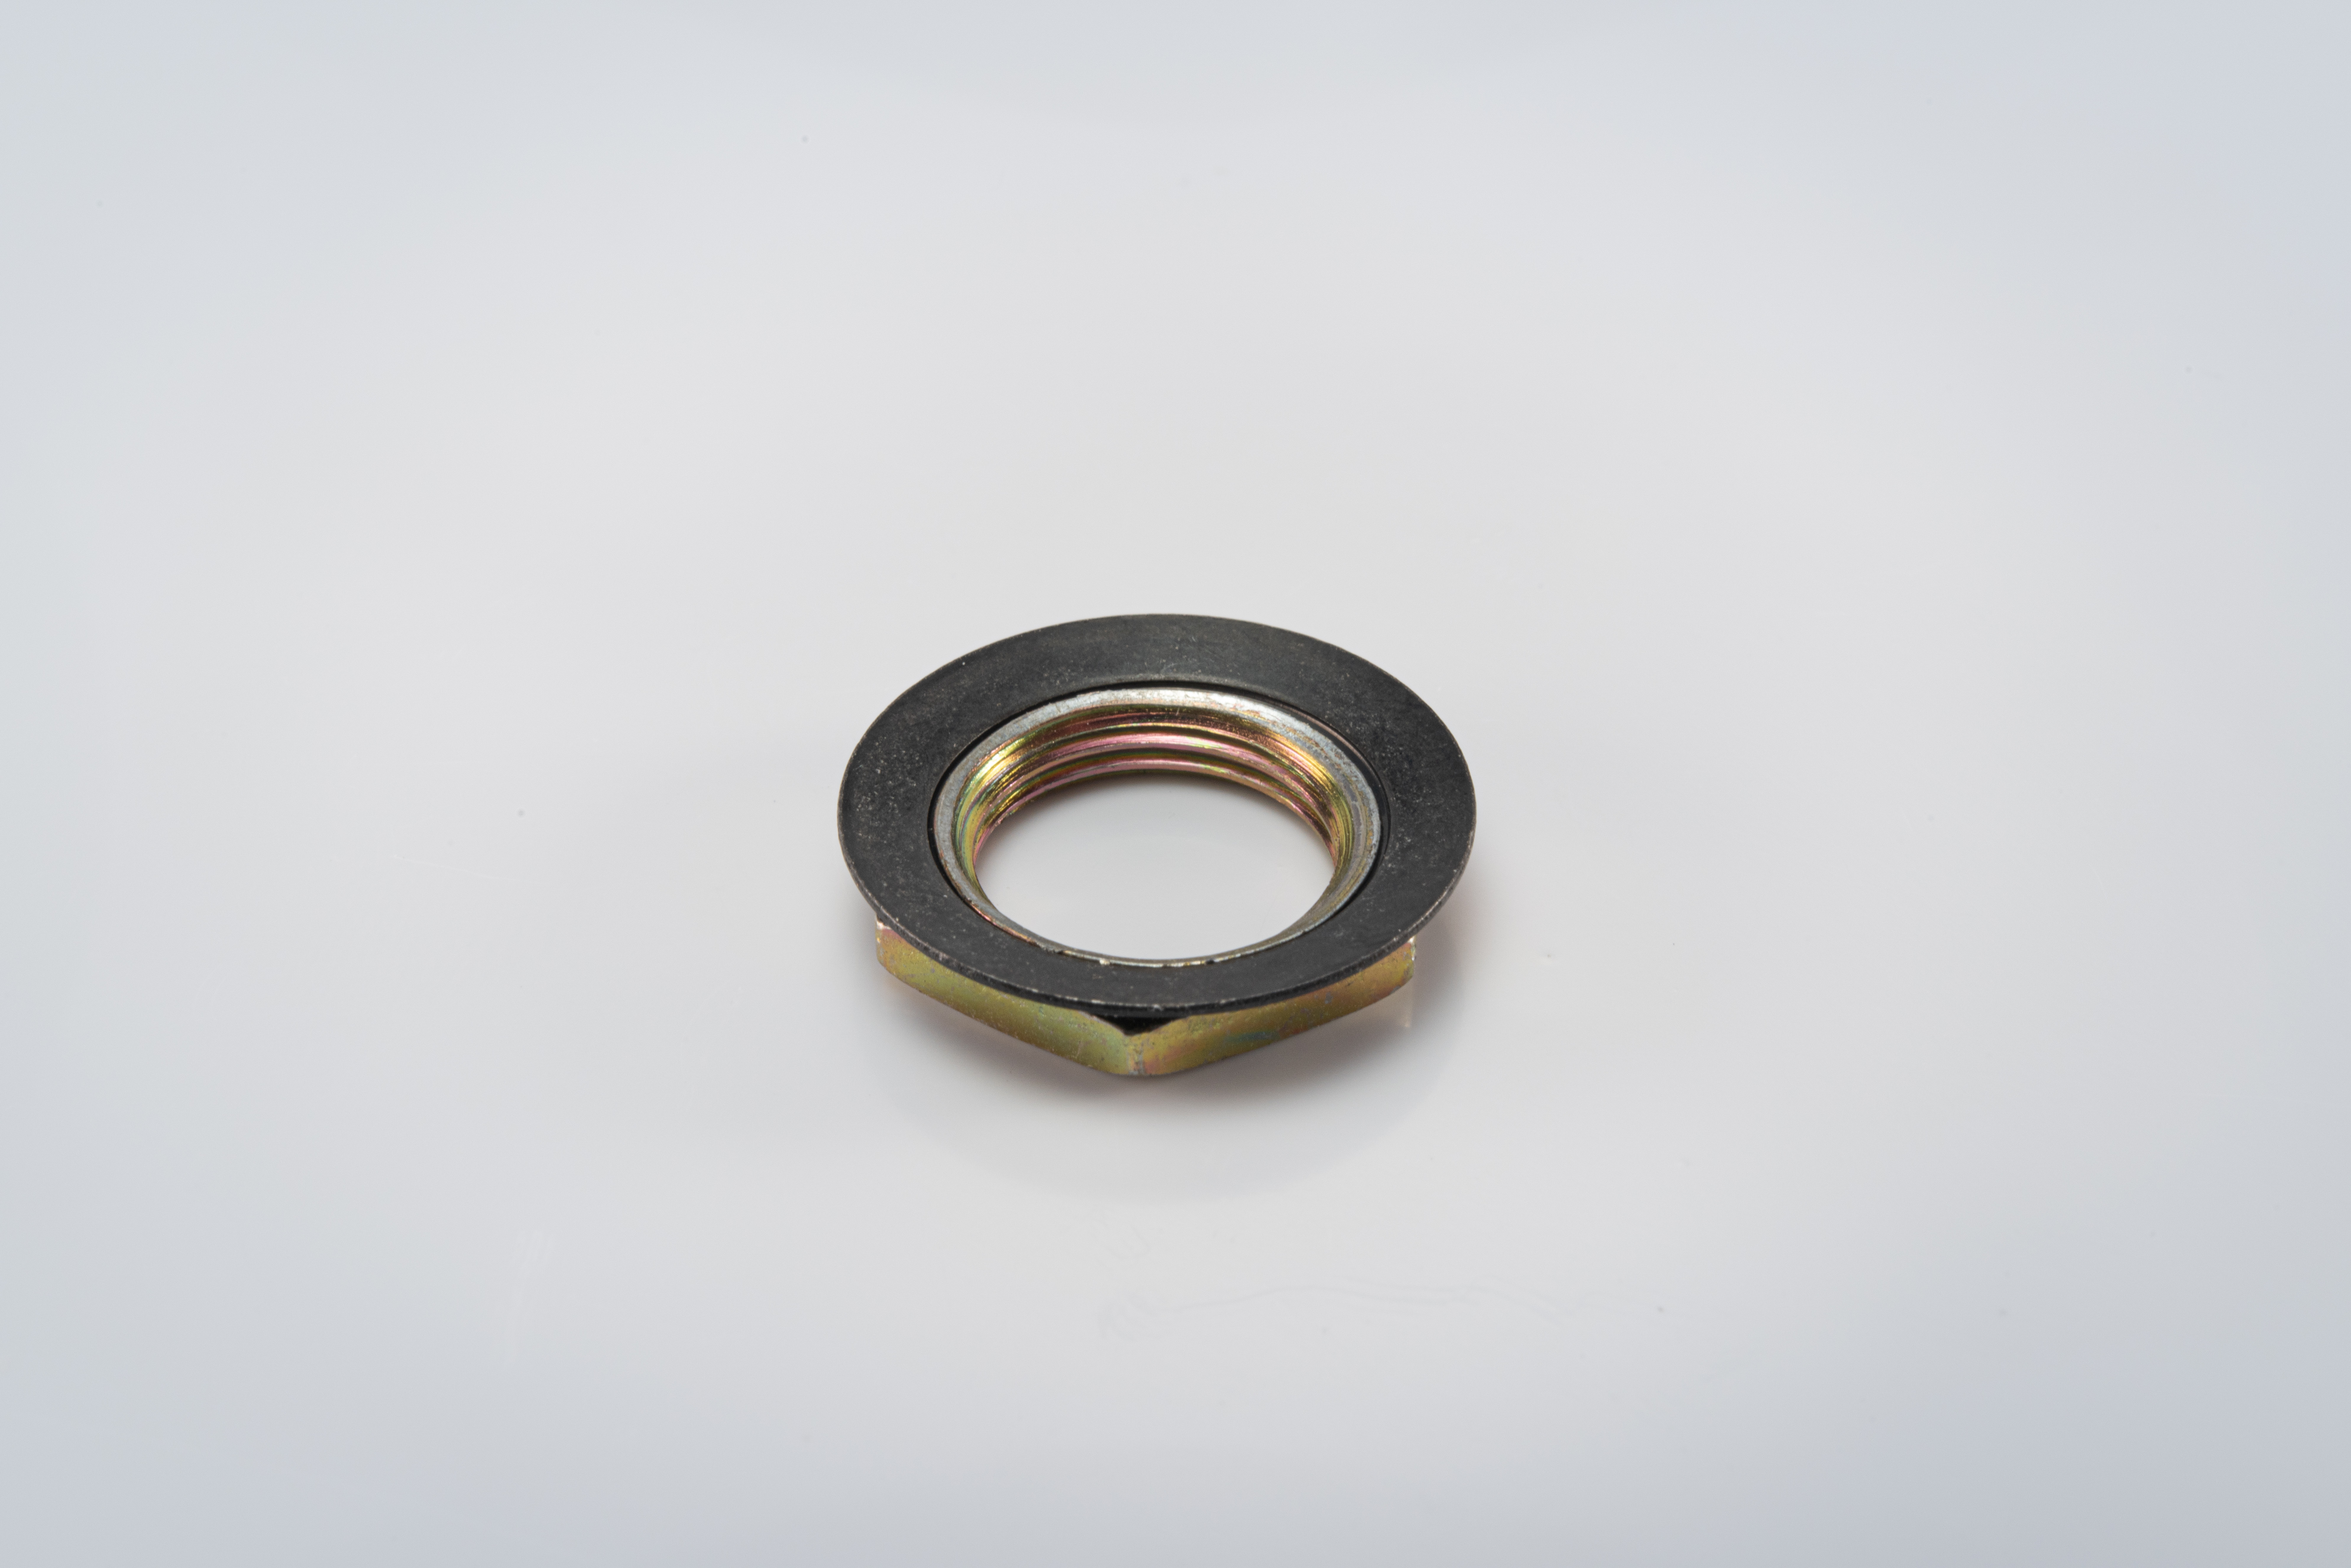 Special Thin Pattern Conical Washer Nut